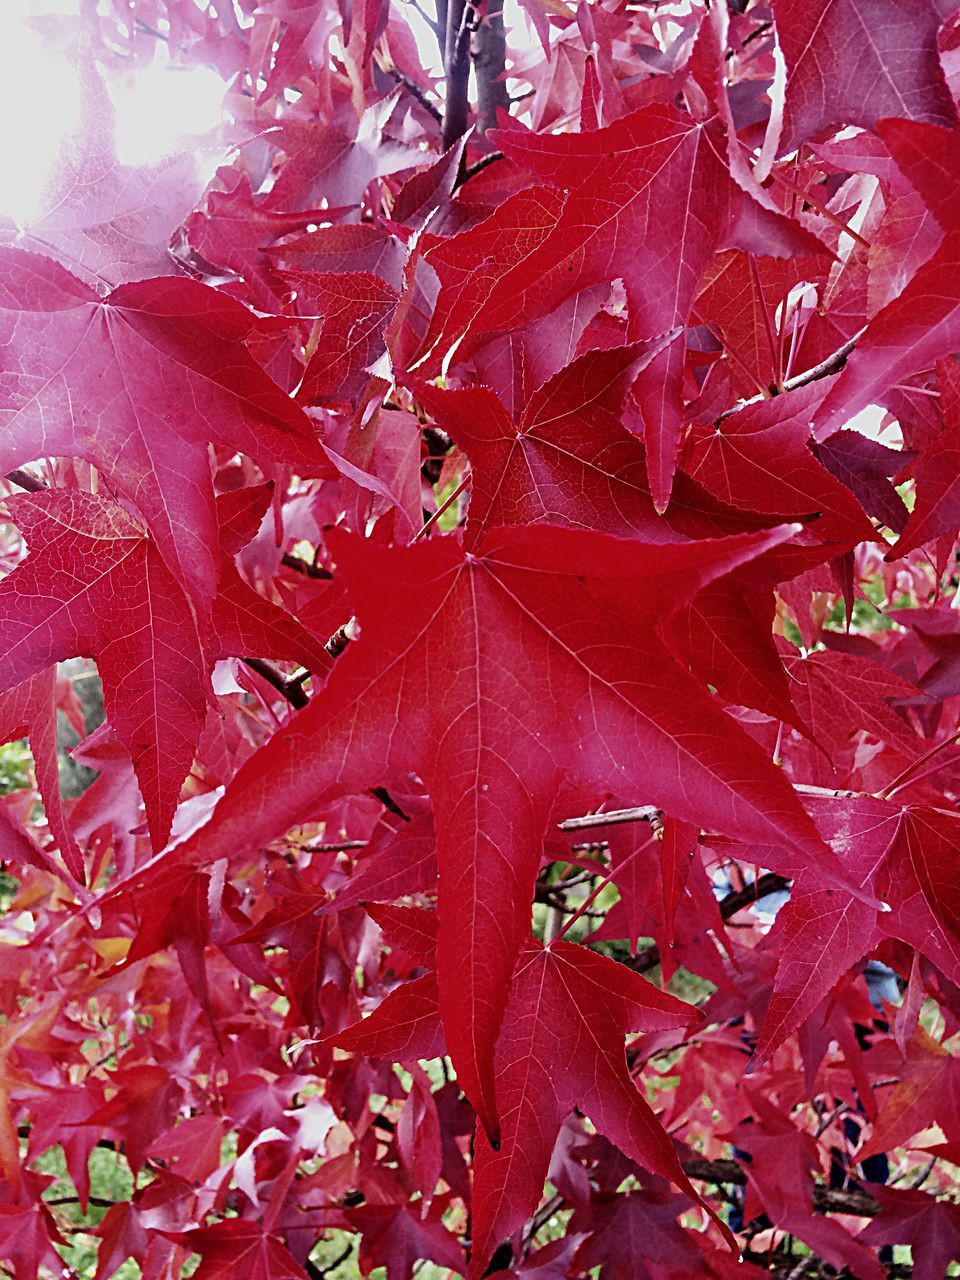 red, no people, full frame, close-up, backgrounds, maple leaf, day, red color, indoors, nature, flag